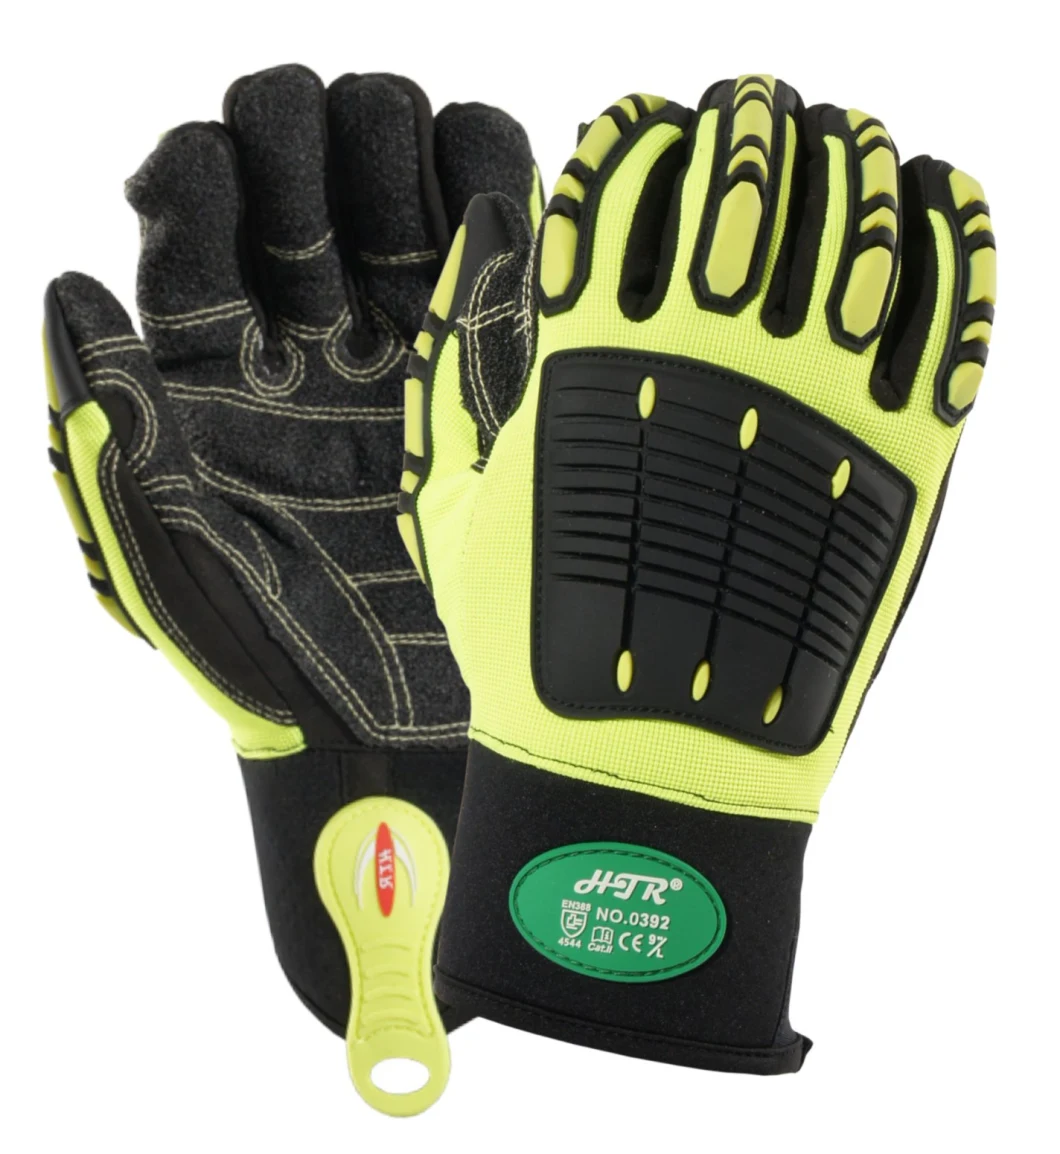 Impact-Resistant Anti-Abrasion Leather Safety Work Gloves with TPR